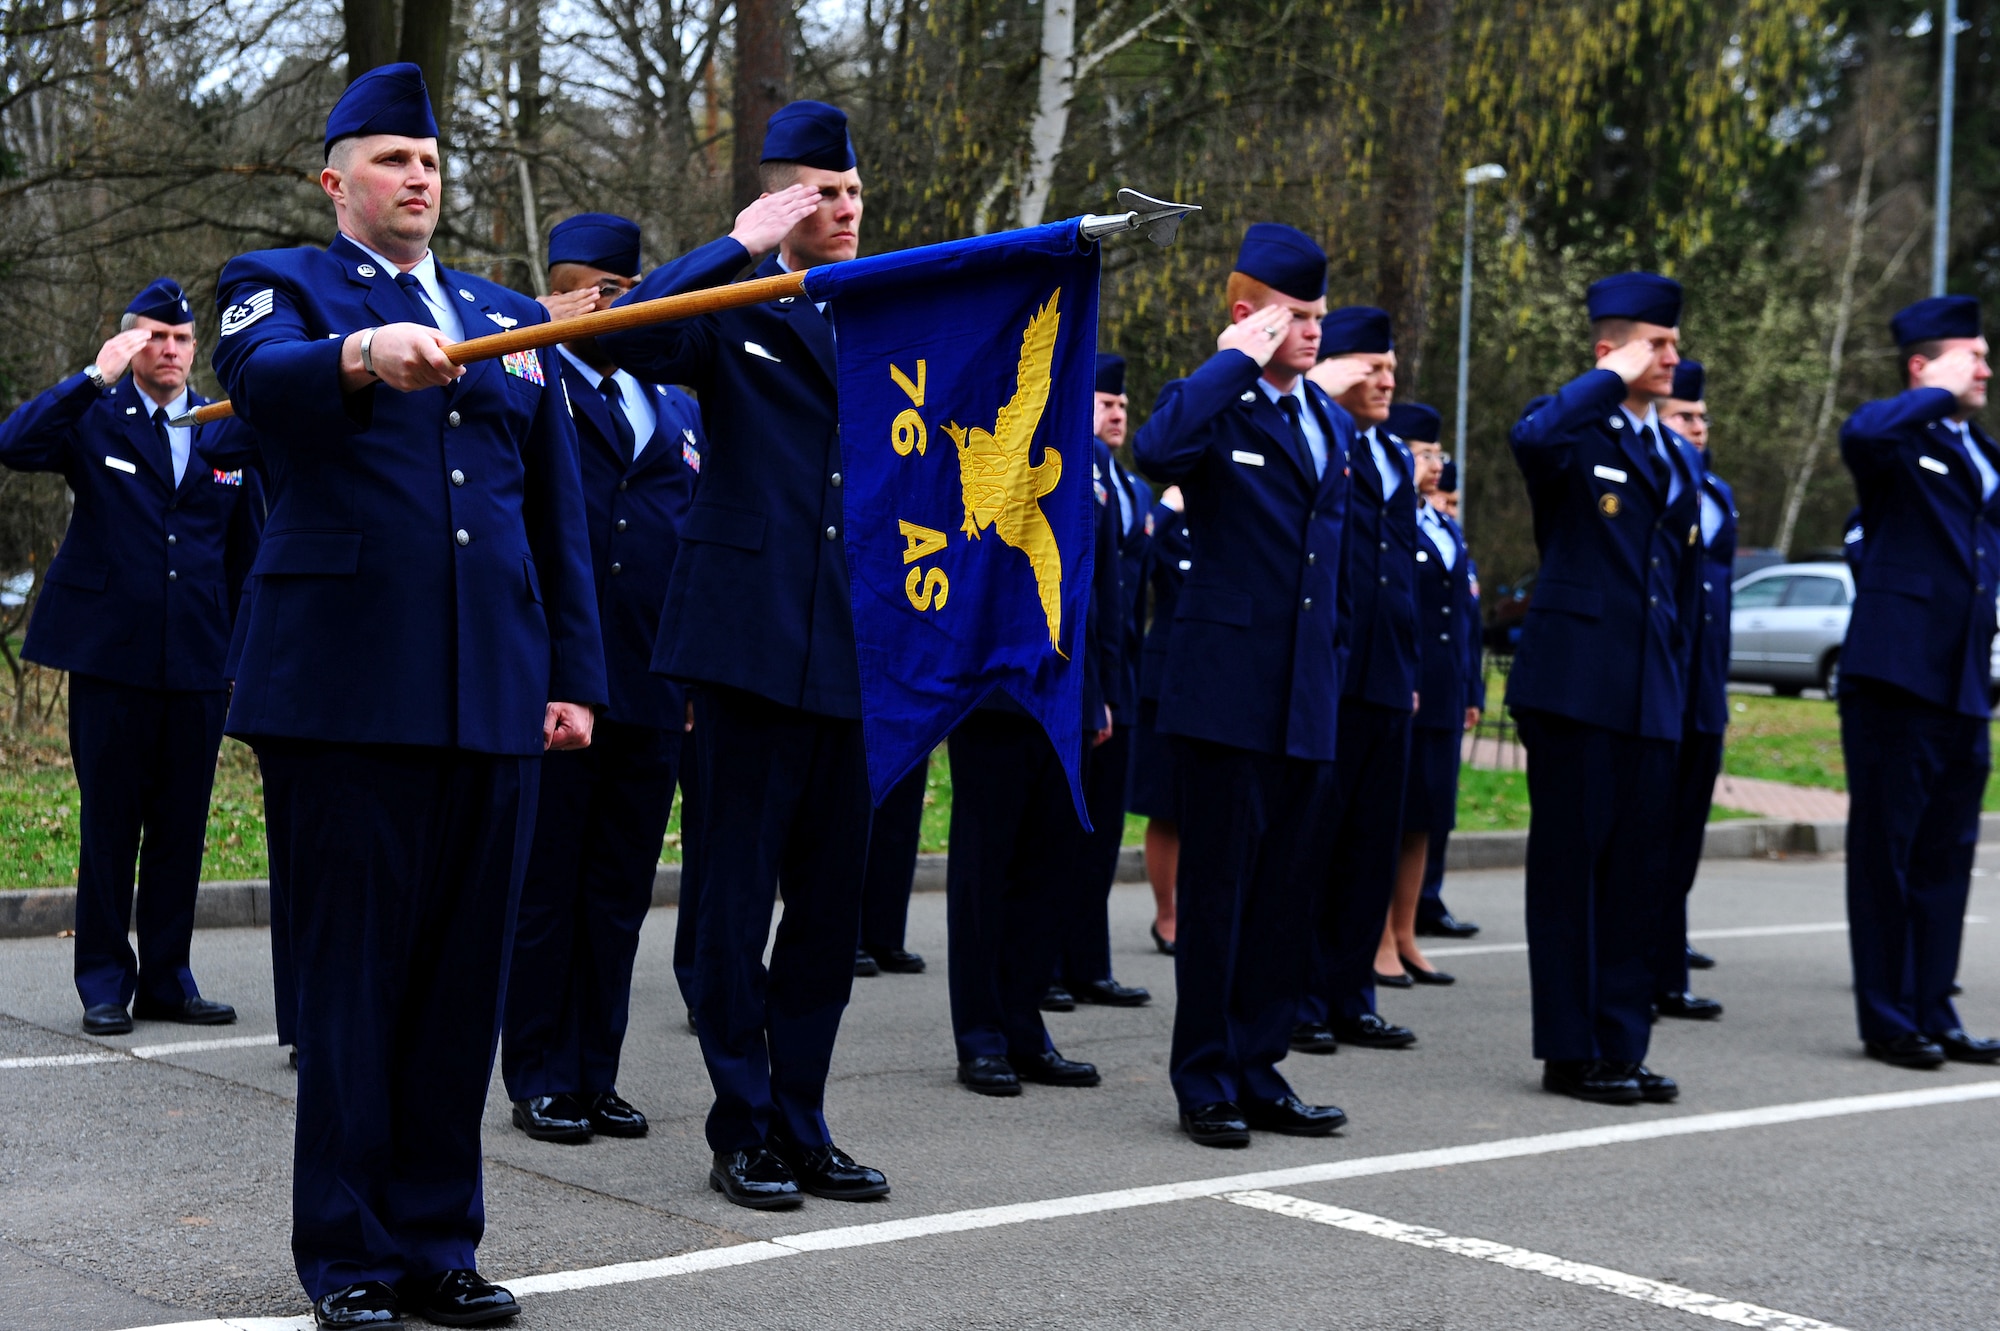 Air Force members from the 76th Airlift Squadron salute during a memorial ceremony on Ramstein Air Base, Germany, April 5, 2012. The squadron honored the six crew members of flight IFO-21. On April 3, 1996, a CT-43 aircraft that was assigned to the 76th AS crashed outside of Dubrovnik Croatia during a peacekeeping mission. This year marked the 16th anniversary. (U.S. Air Force photo by Amn Brea Miller)